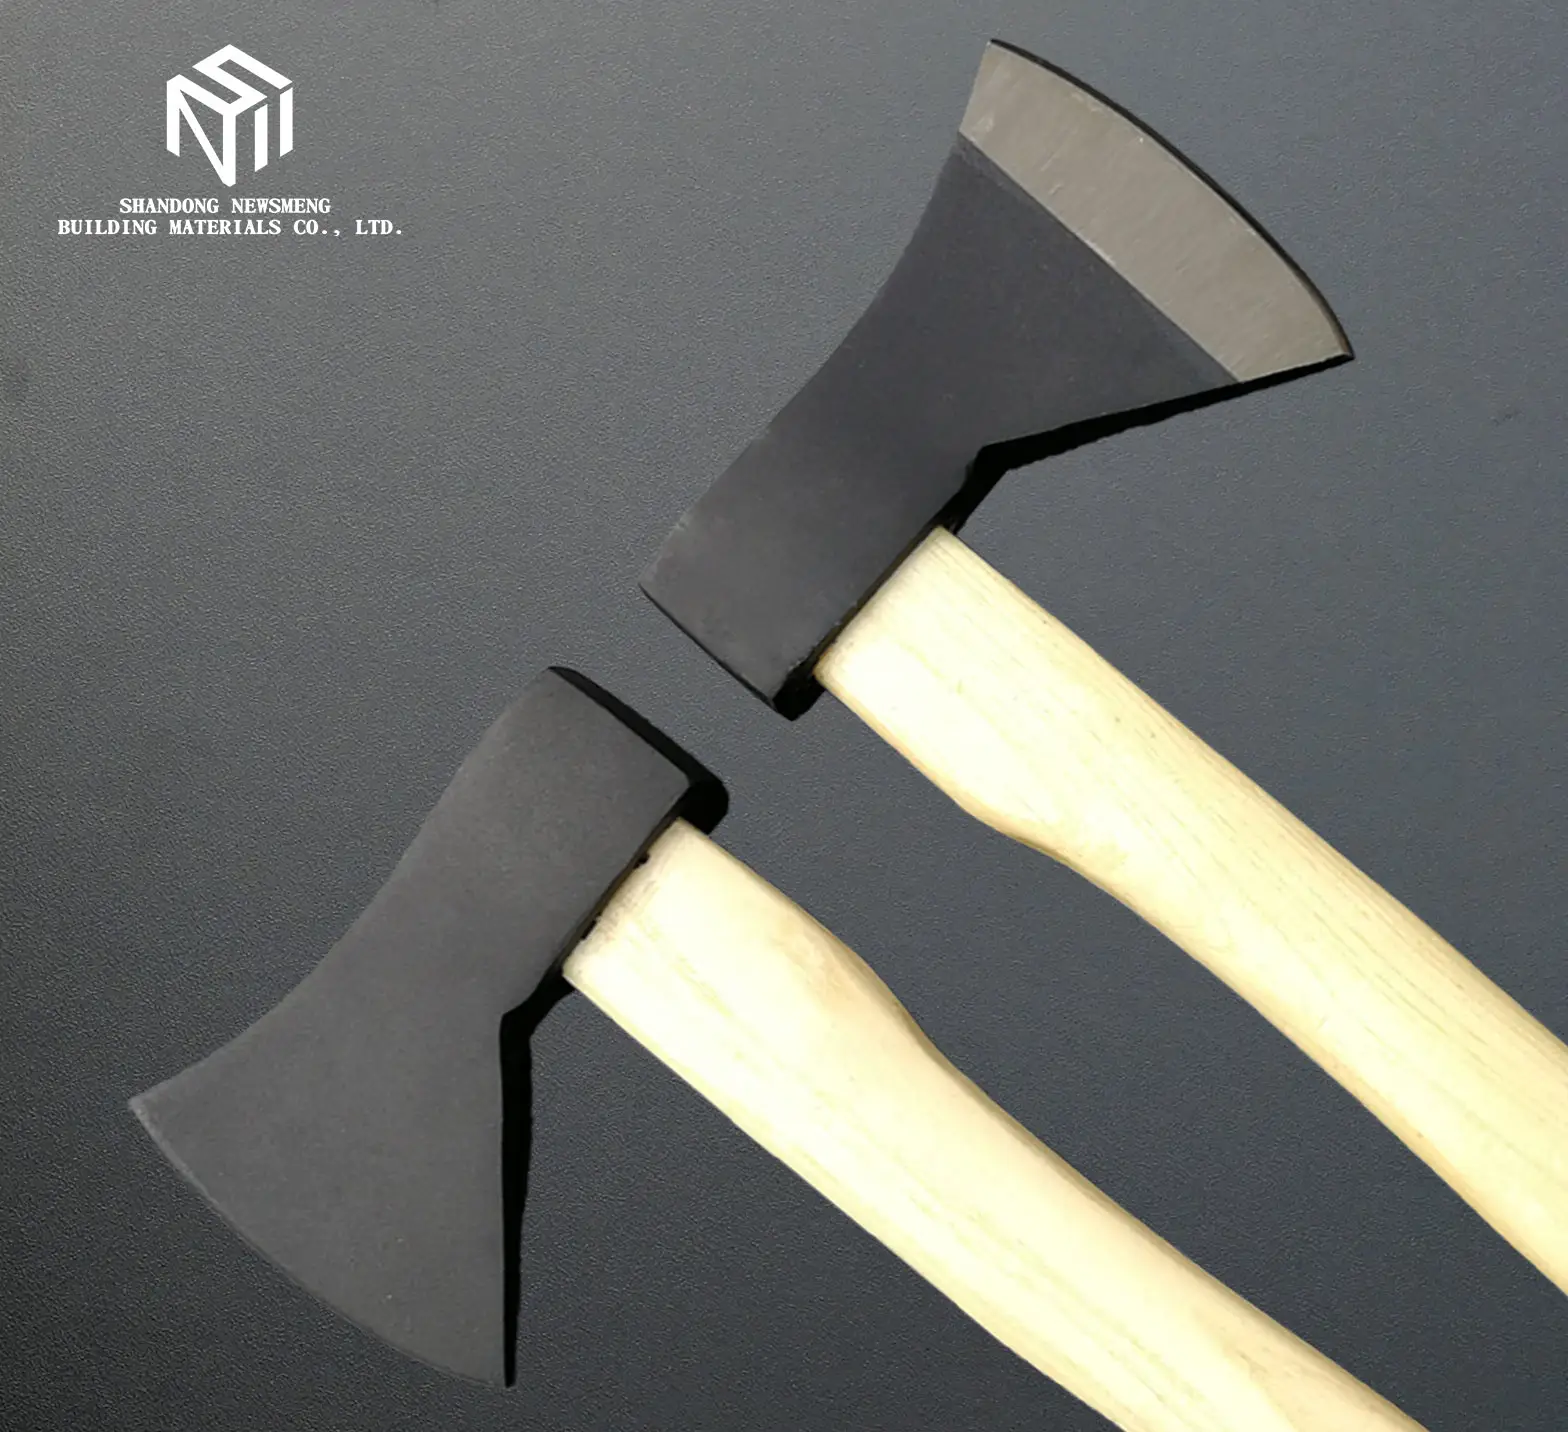 Special Offer 1kg working tomahawk decorative axe